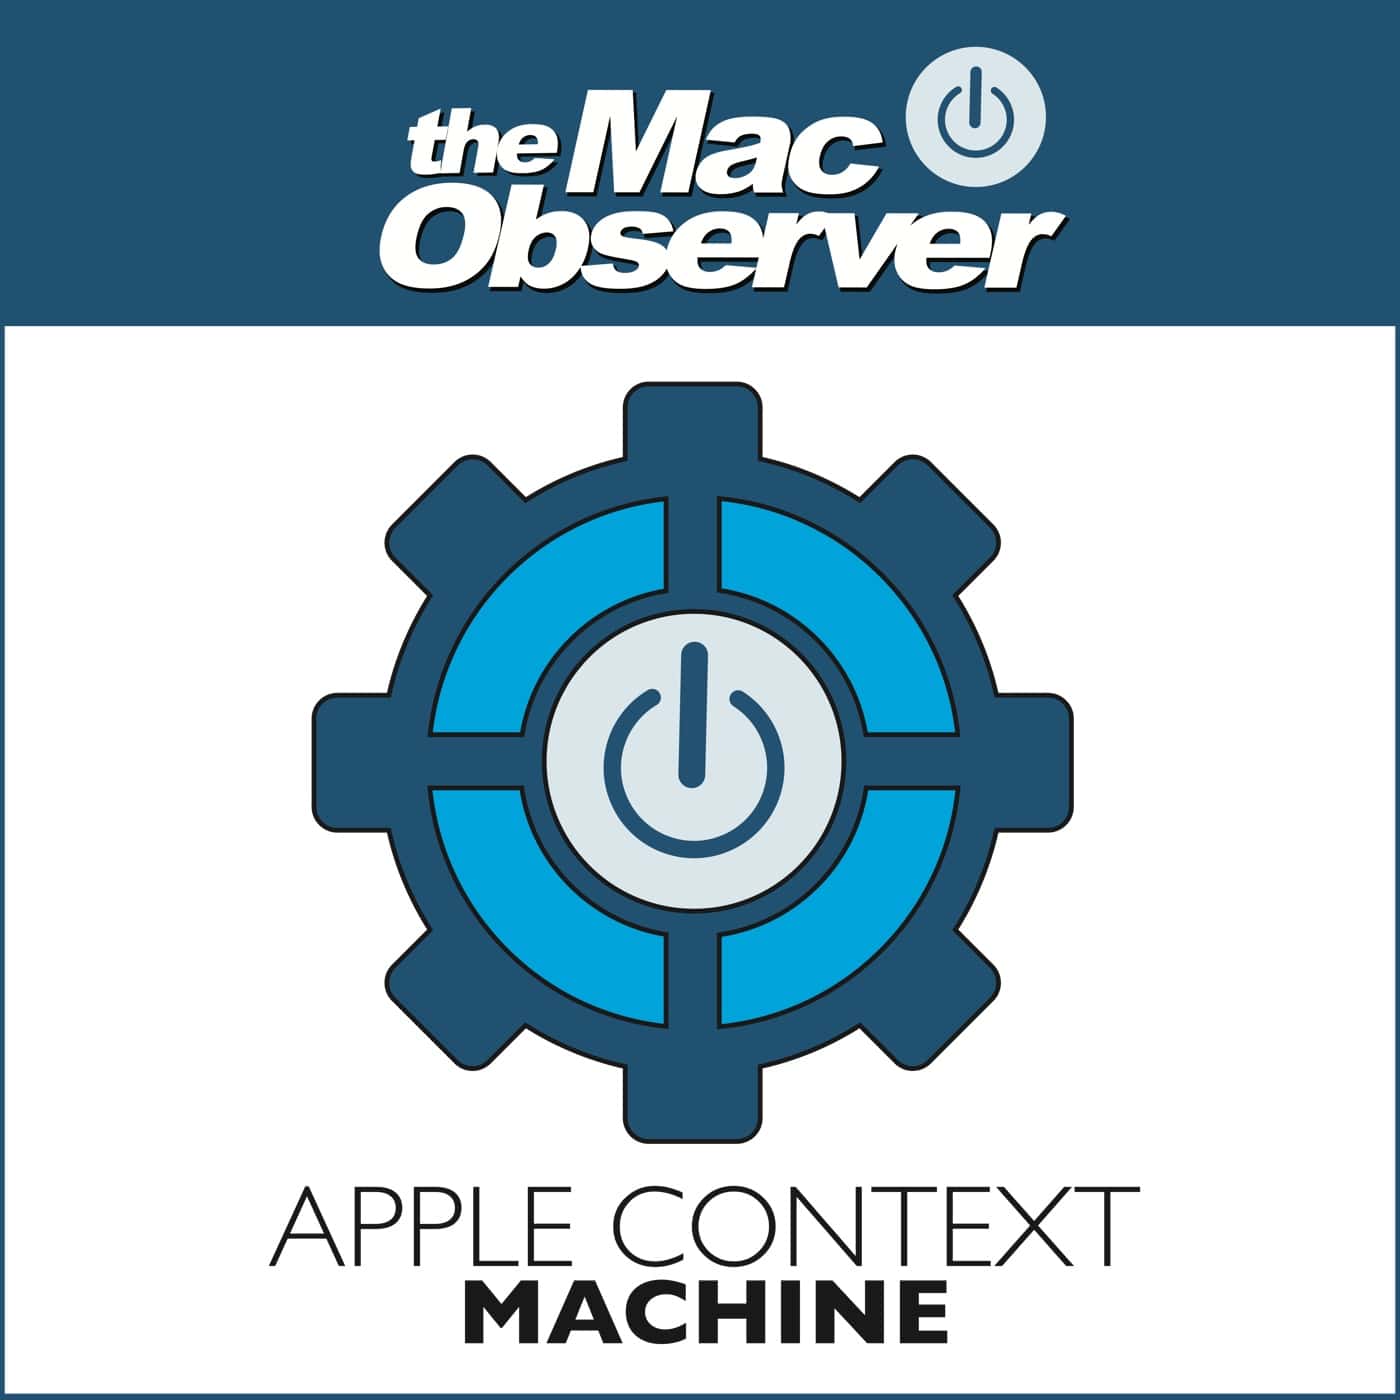 ACM 365: iOS 10, macOS Sierra, watchOS 3.0, and Differential Privacy